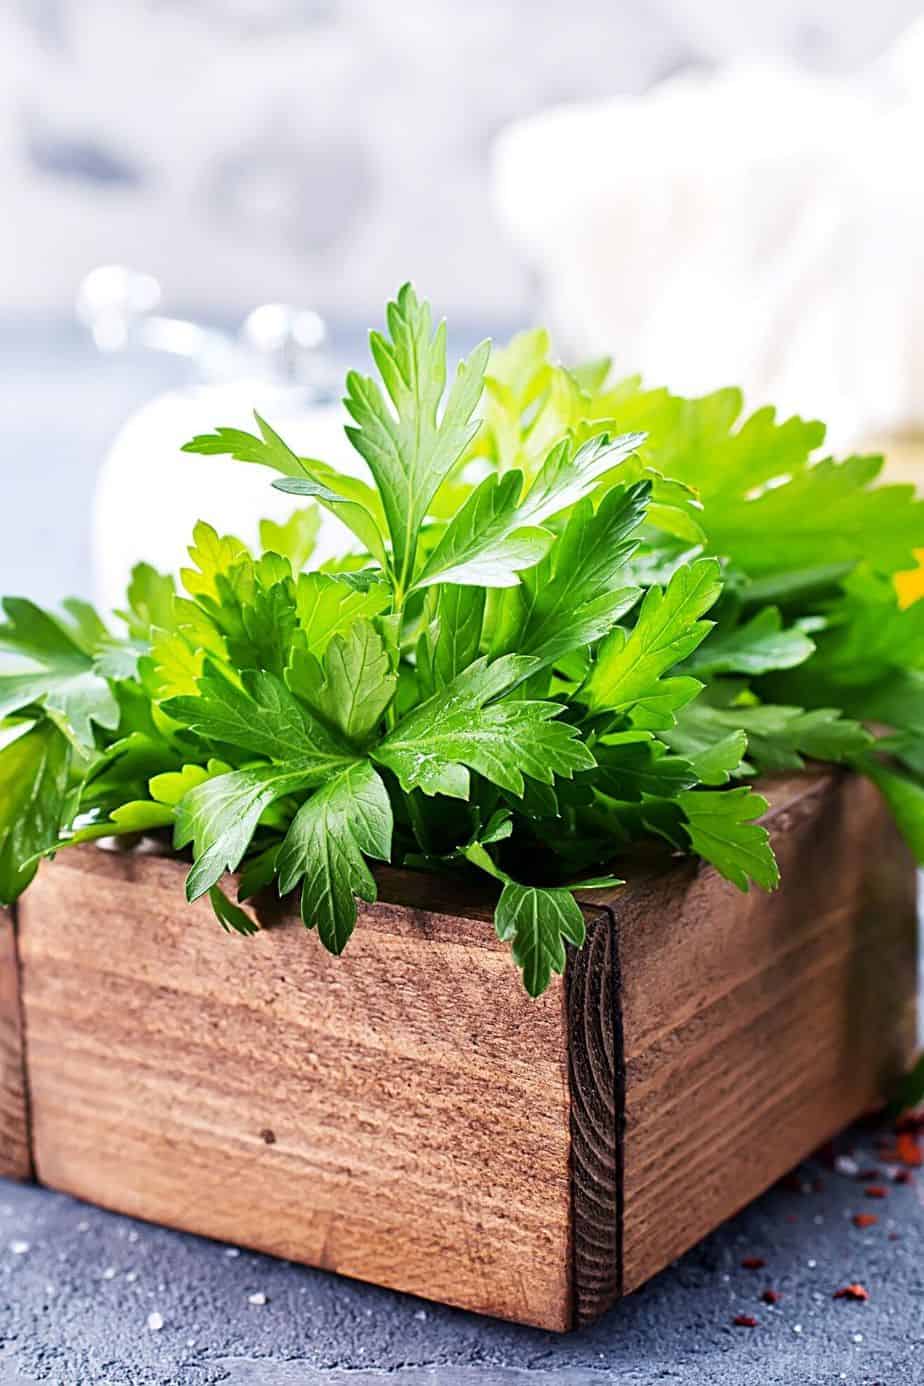 Parsley is known for its curly, triangular leaves and can grow on a north-facing balcony